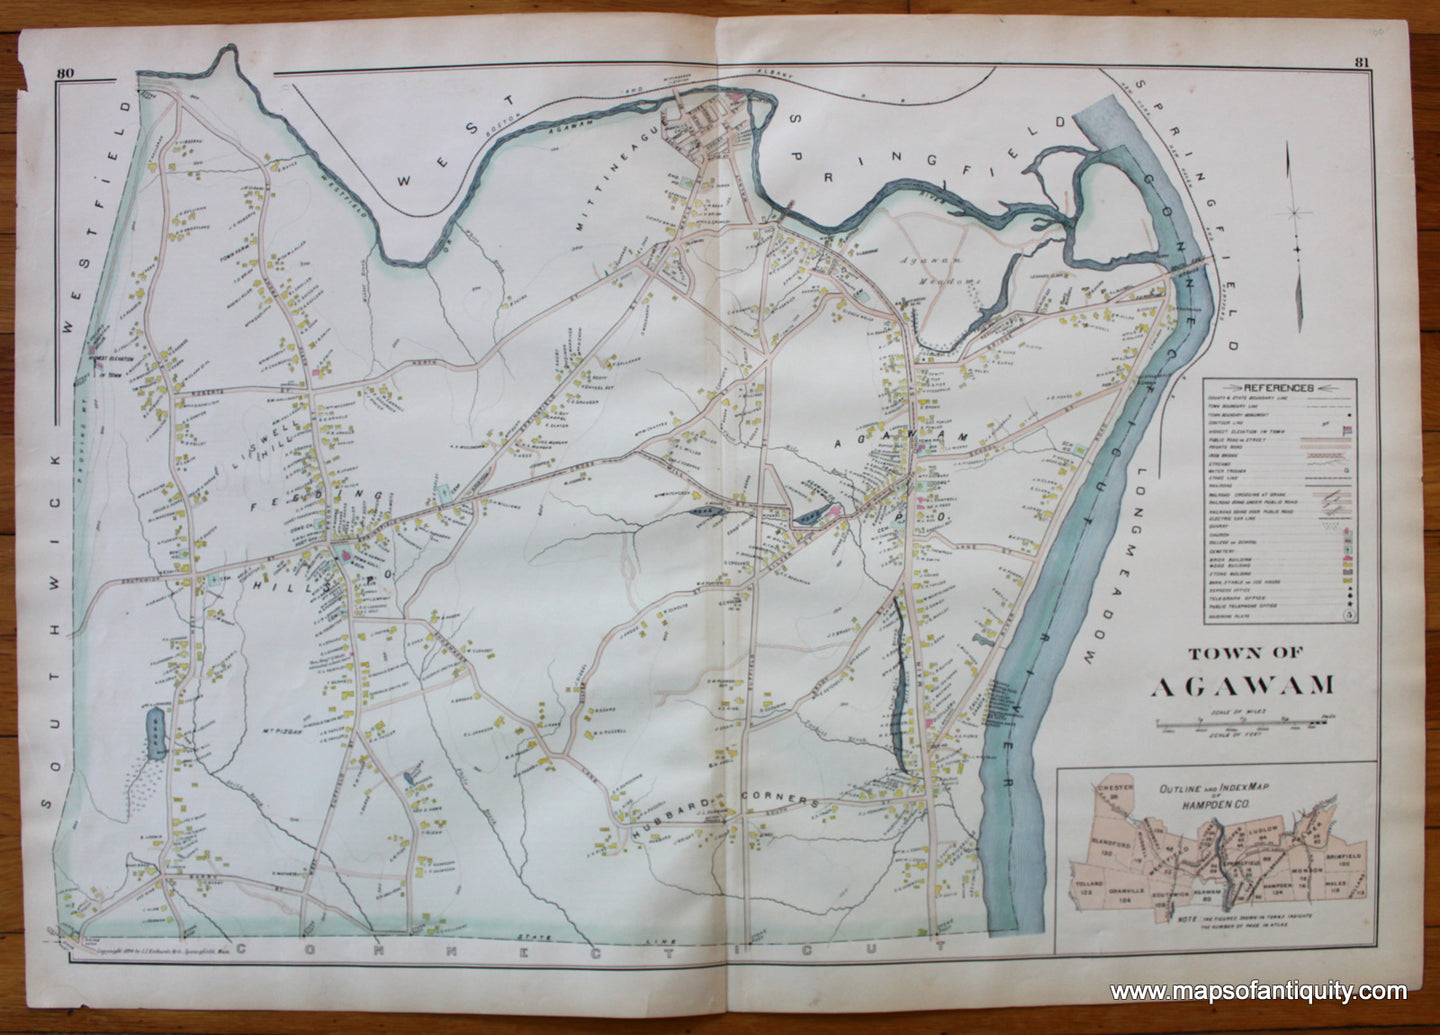 Antique-Map-Town-of-Agawam-Towns-Cities-New-Topographical-Atlas-of-the-County-of-Hampden-Massachusetts-MA-Mass-Richards-1894-1890s-1800s-Late-19th-Century-Maps-of-Antiquity